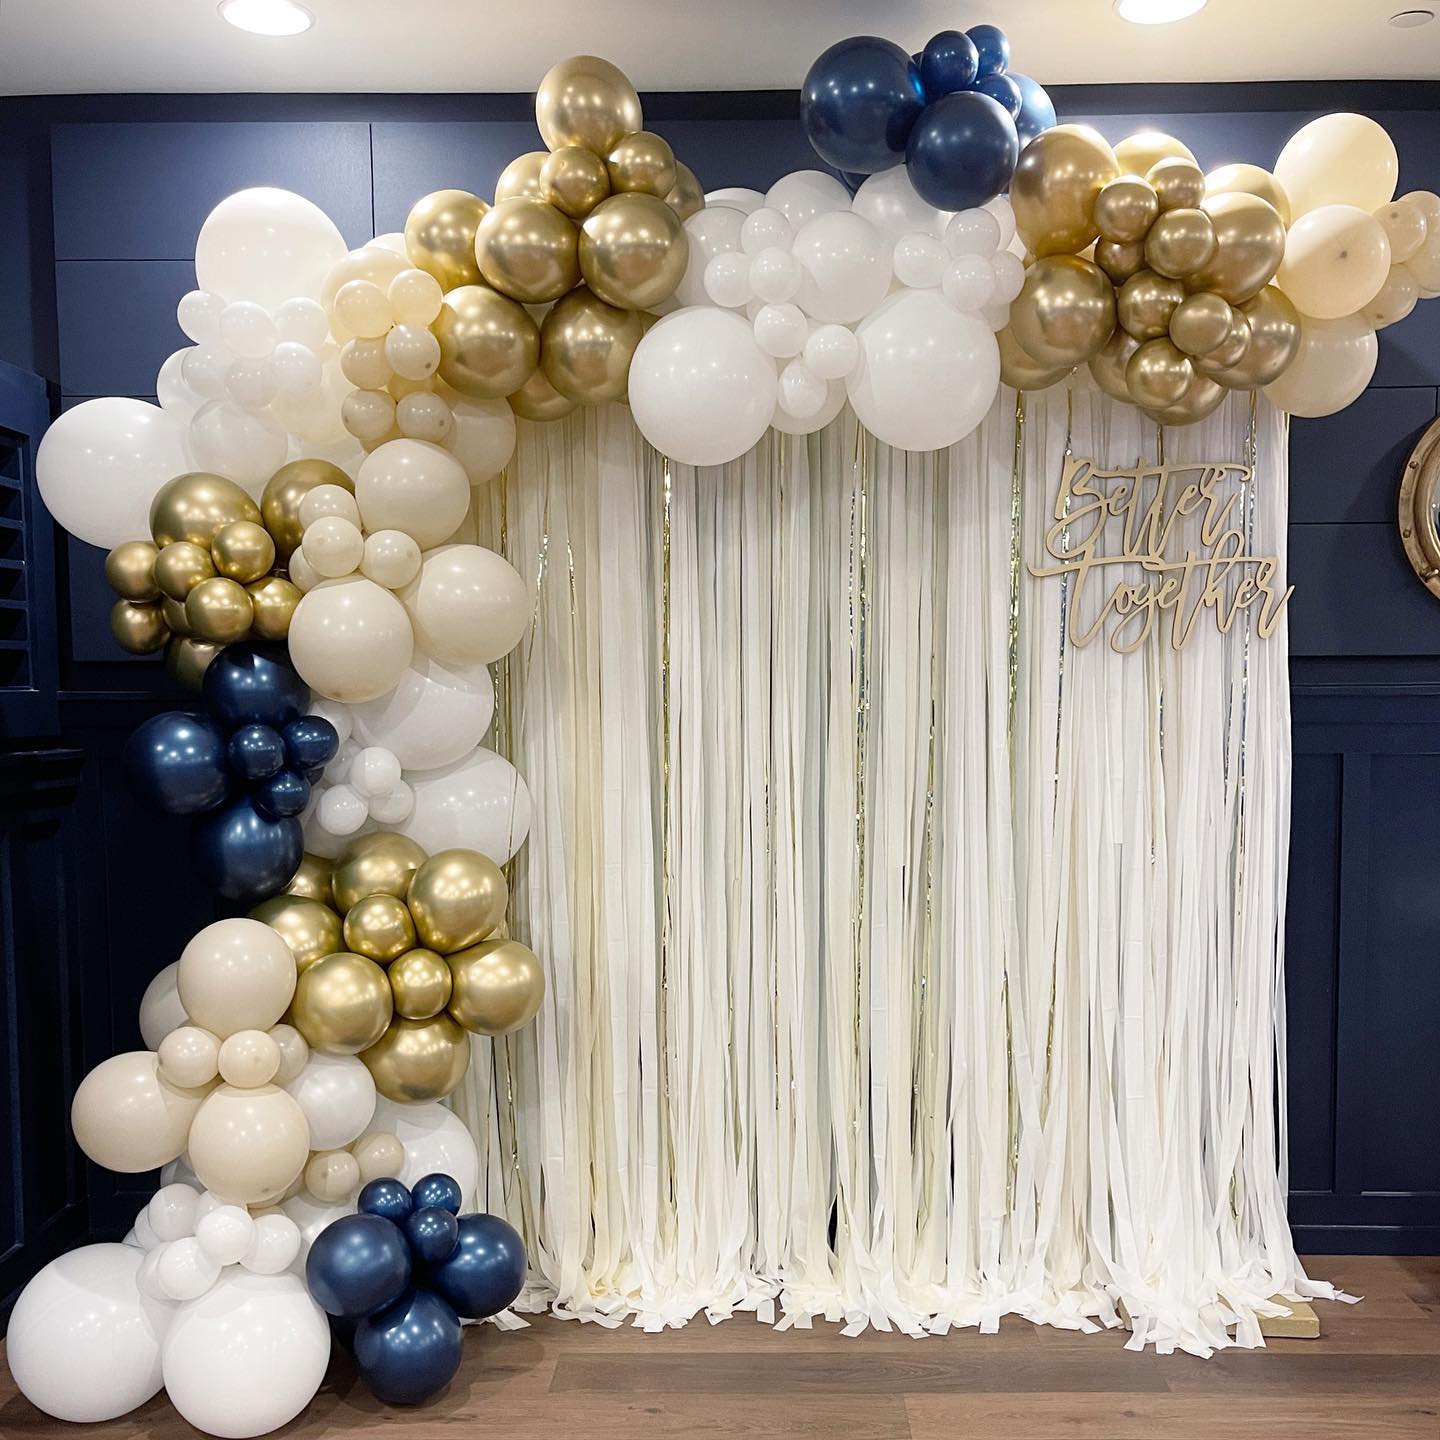 *NEW RENTAL ALERT*

Our neutral streamer wall is going to be perfect for Weddings, engagement parties, bridal luncheons & more! Just switch out balloon colors to match your event! 

#bettertogether #engaged #weddingbackdrop #streamerwall #photobackdrop #photobooth #balloons #balloongarland #ballooninstallation #balloonstylist #panamacitybeach